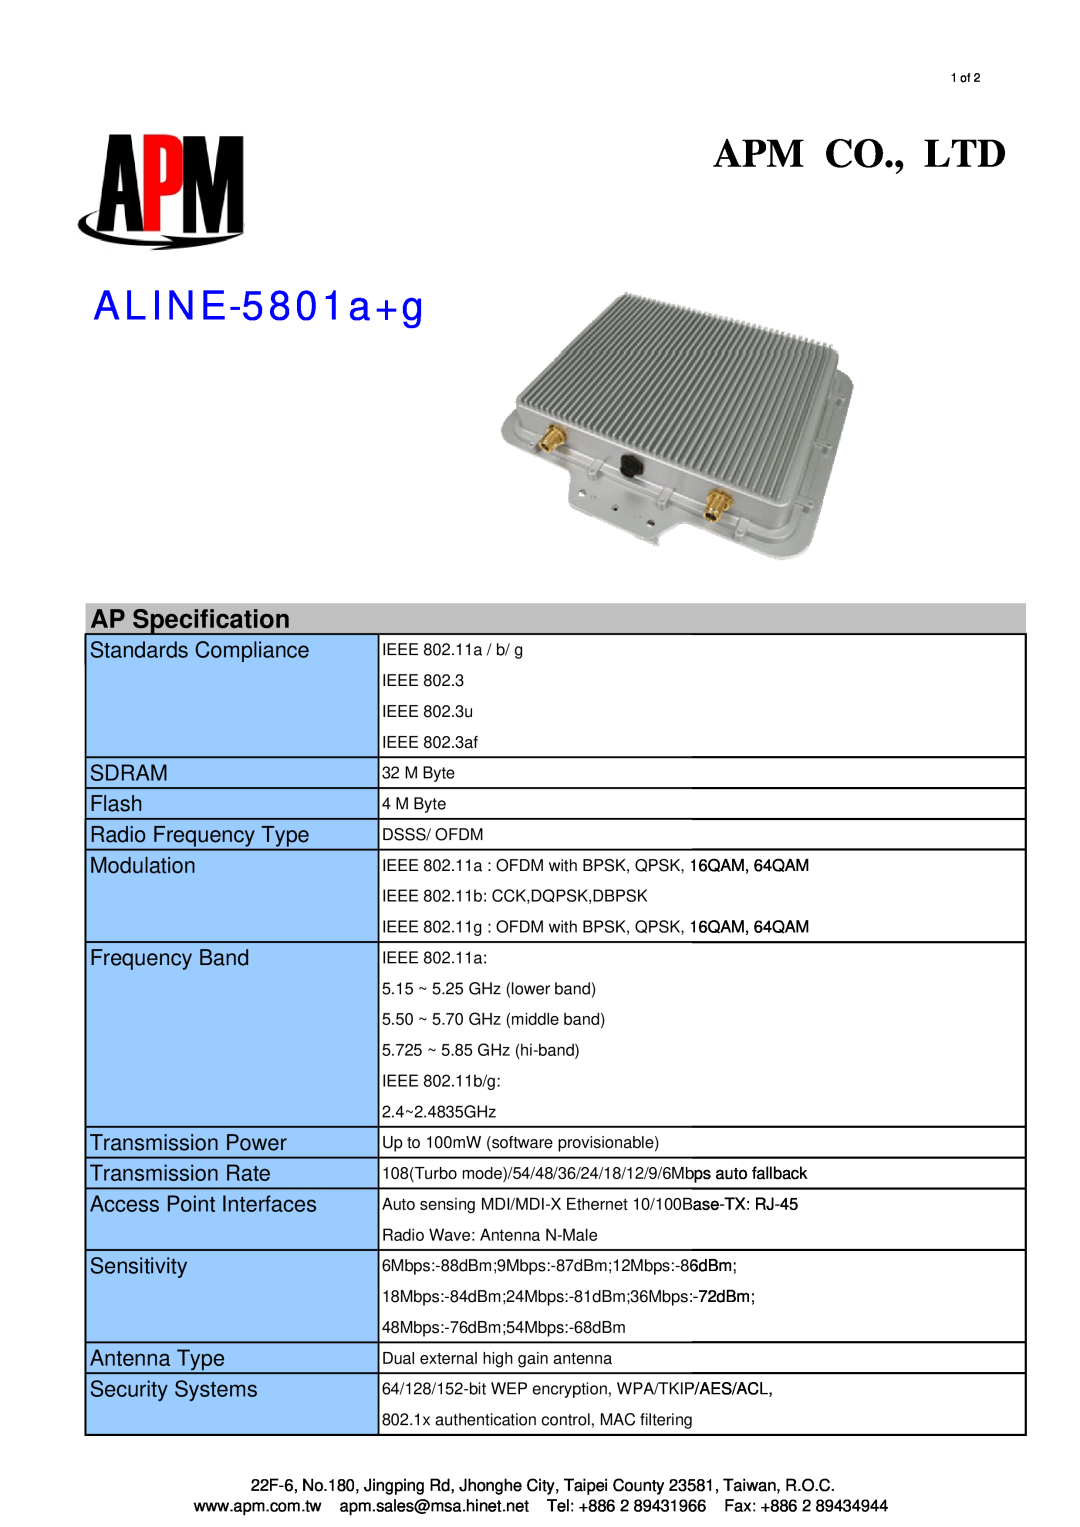 APM ALINE-5801A+G specifications AP Specification, ALINE-5801a+g 